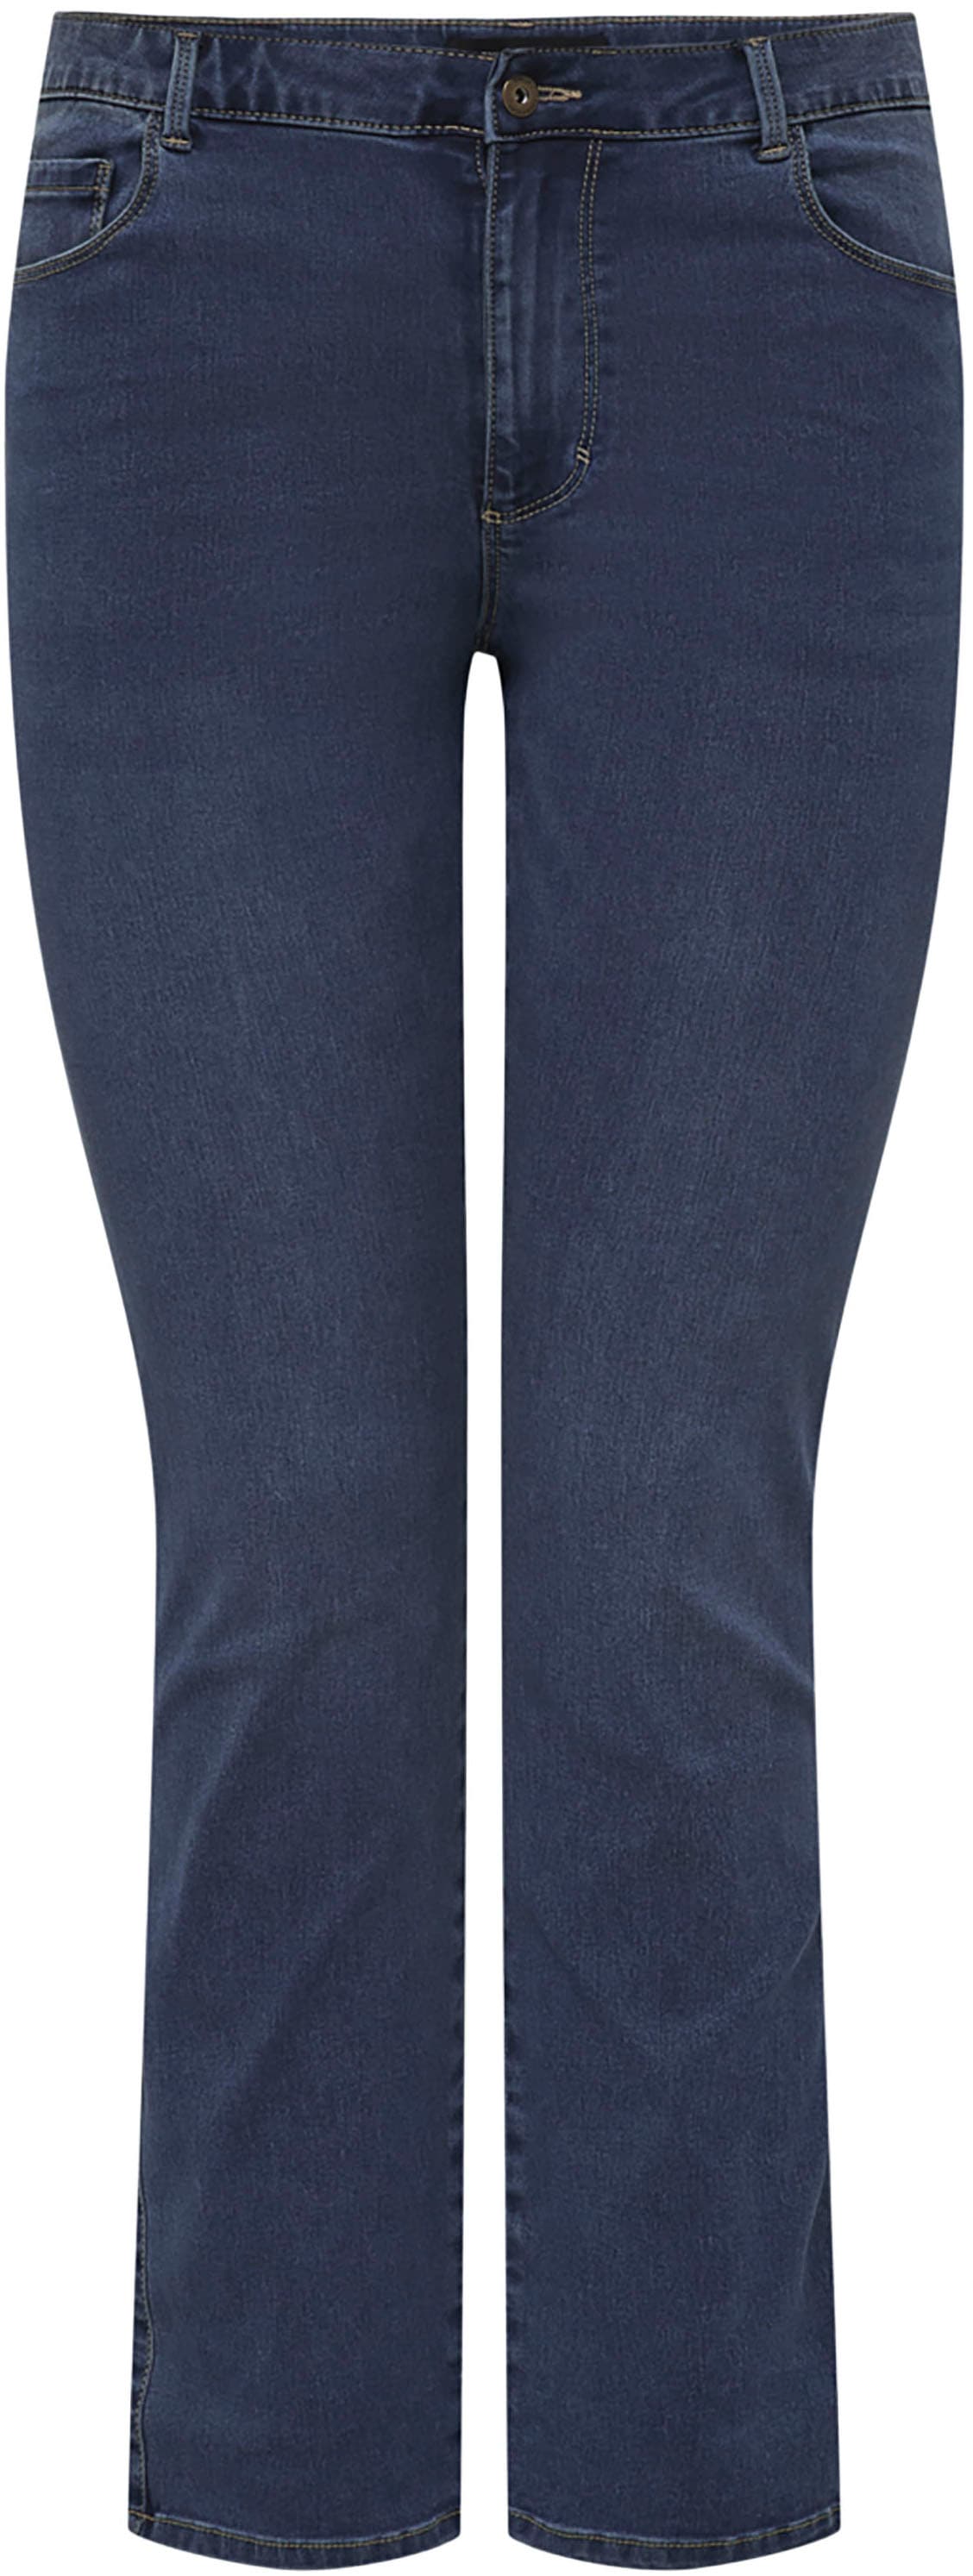 ONLY CARMAKOMA Gerade Jeans »CARAUGUSTA« von ONLY CARMAKOMA